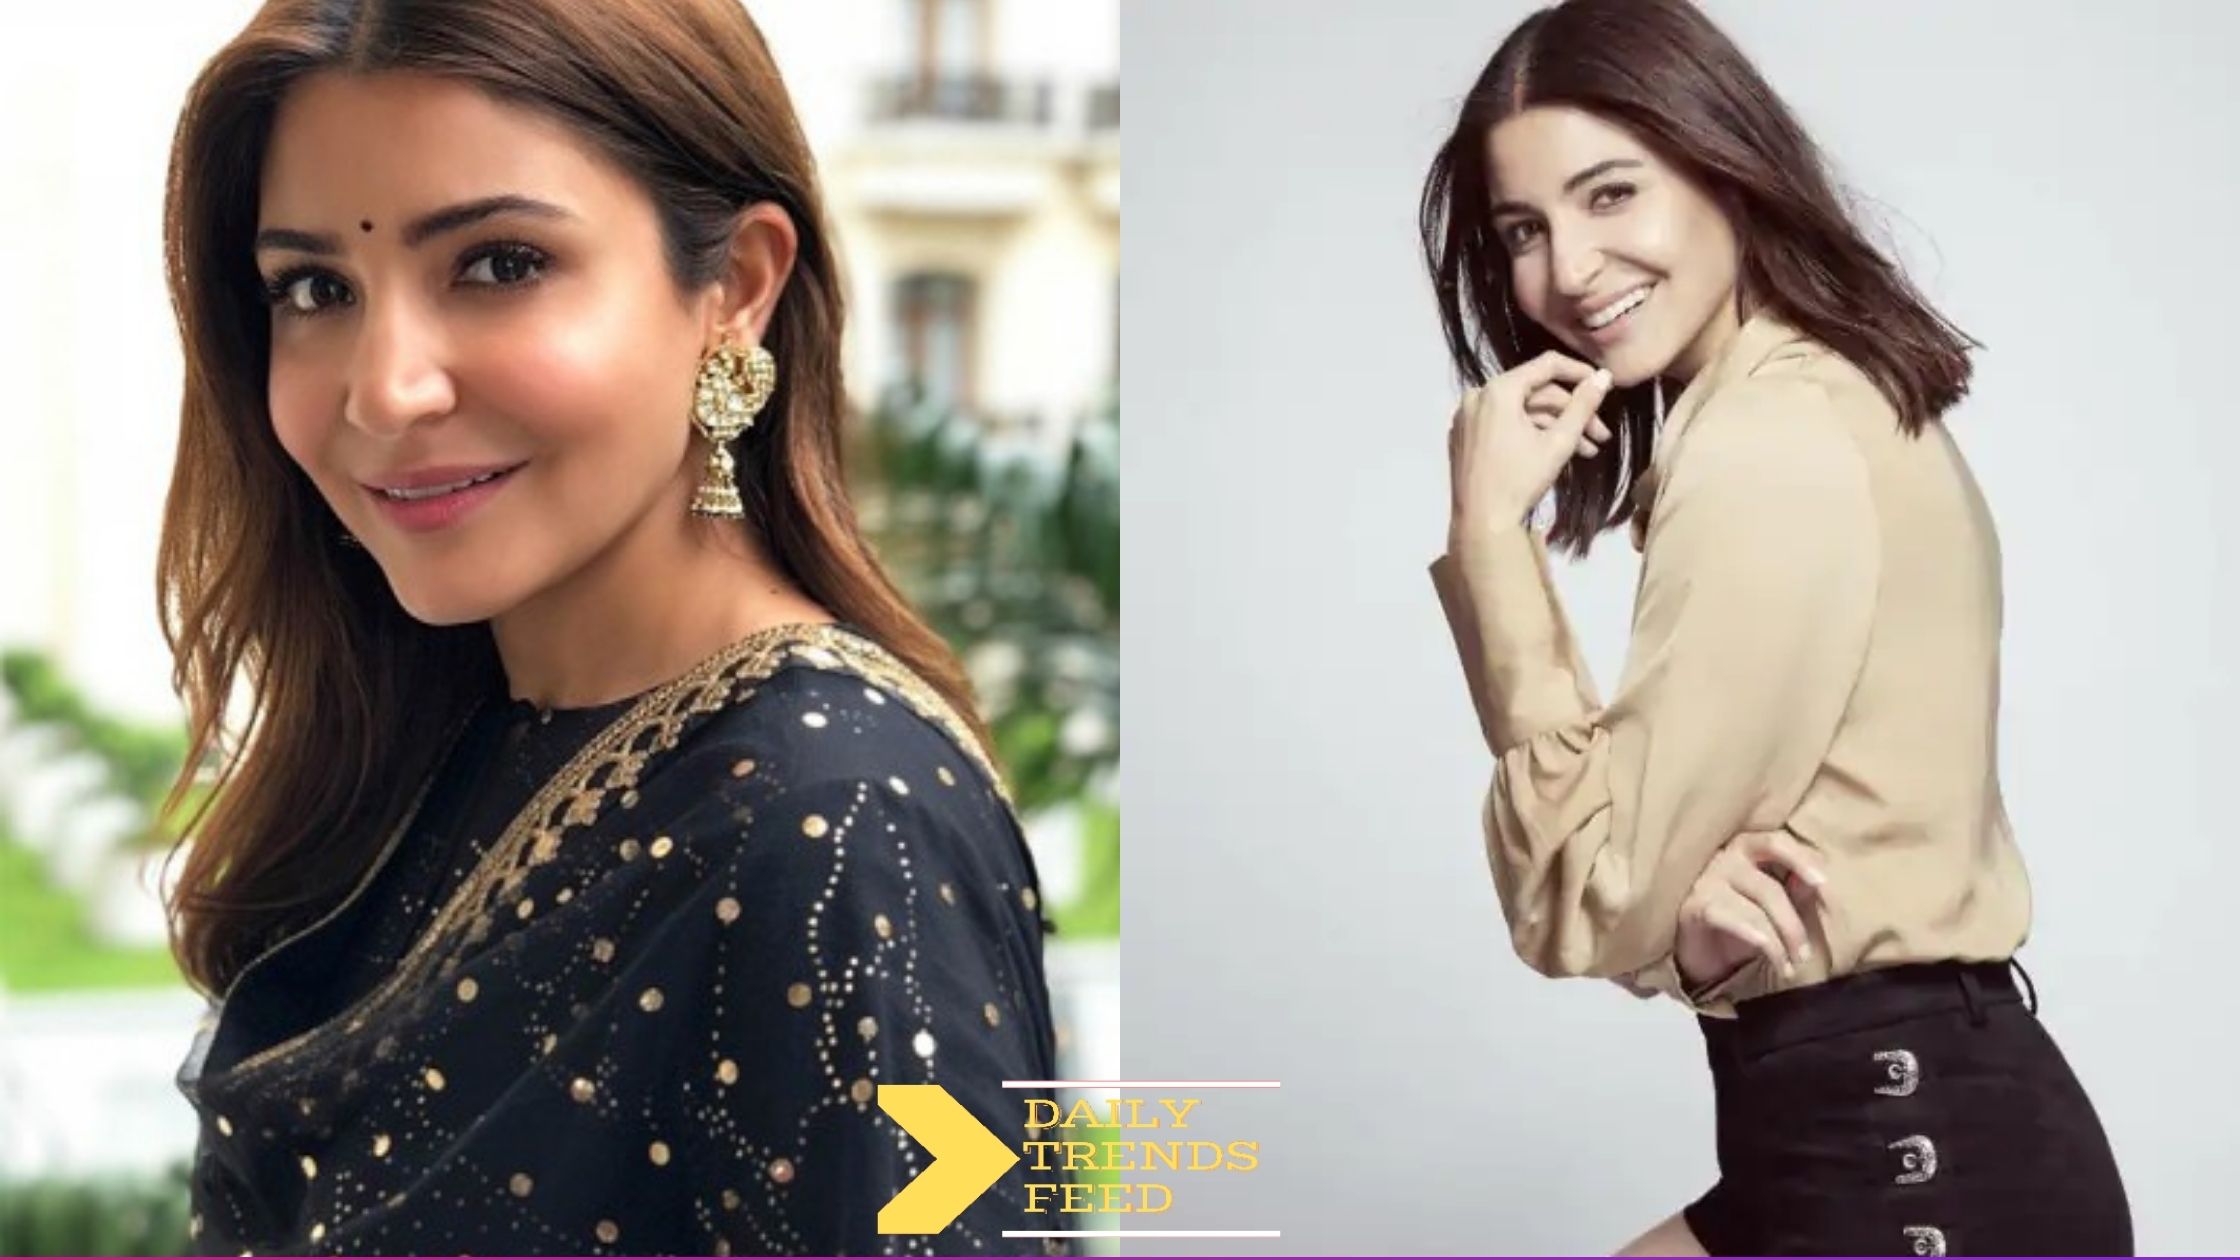 Anushka Sharma Quiz: Calling all fans to take this interesting quiz ! Play this Anushka Sharma quiz and show us how big a fan you are!